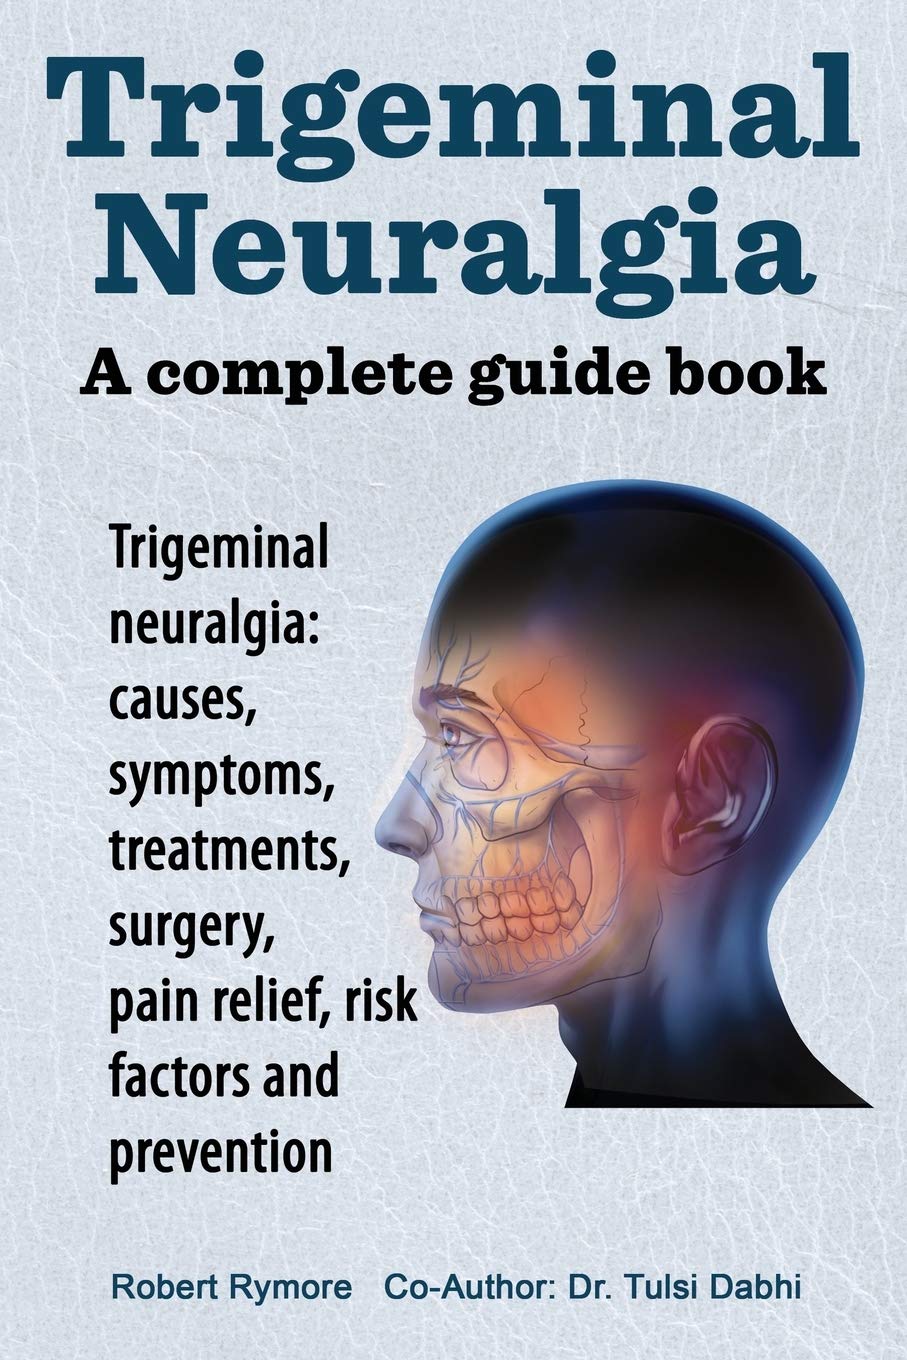 Best Treatment for Neuralgia: Top Solutions for Neuralgia Relief